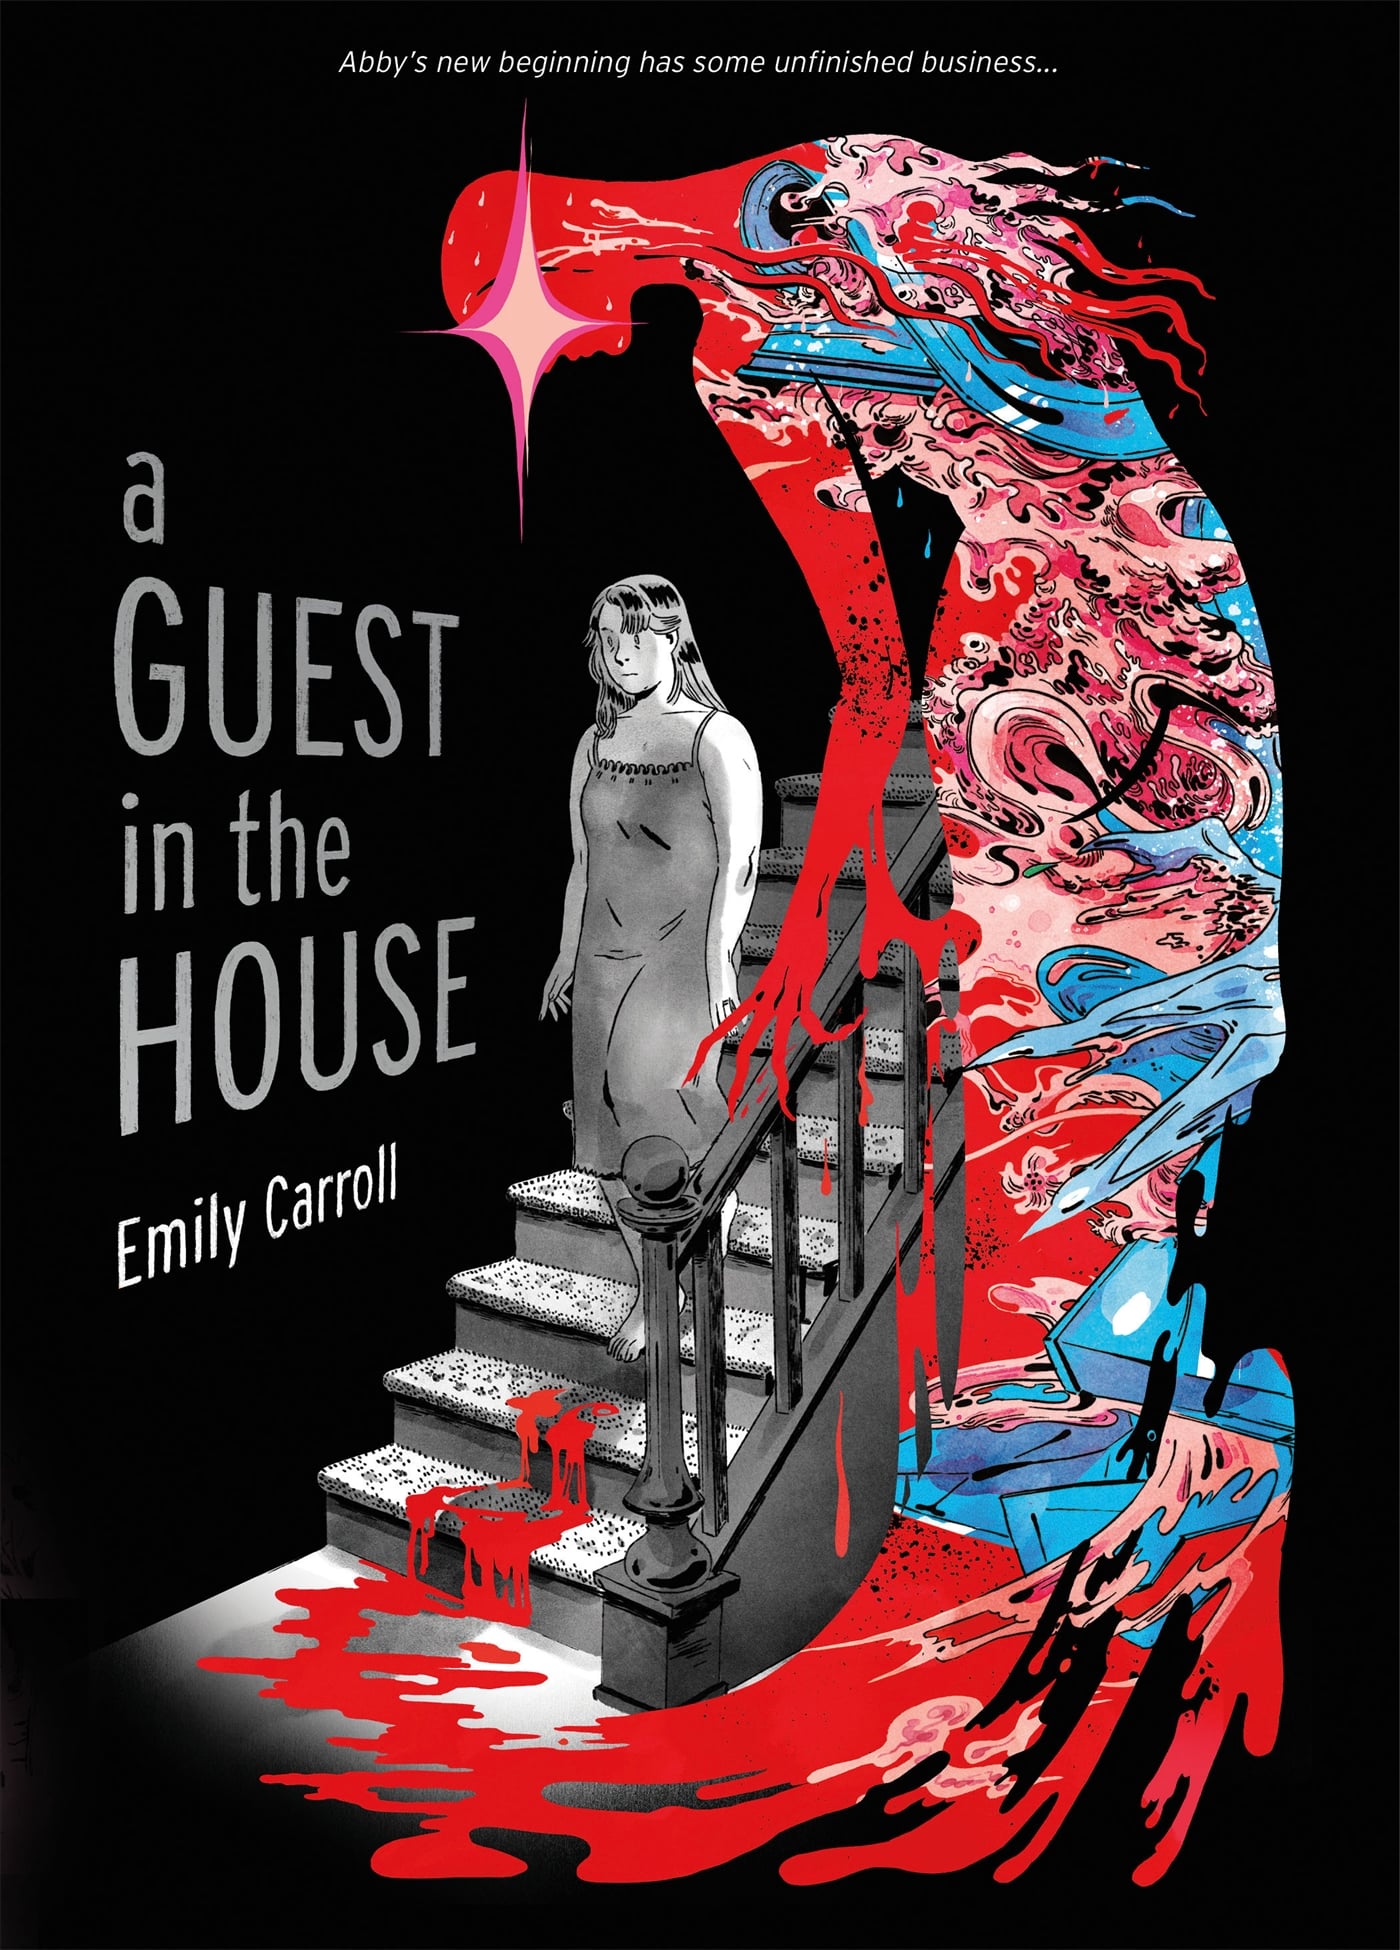 Image shows a woman descending a staircase as a red and blue figure towers above her, with text reading "A Guest in the House by Emily Carroll" from First Second